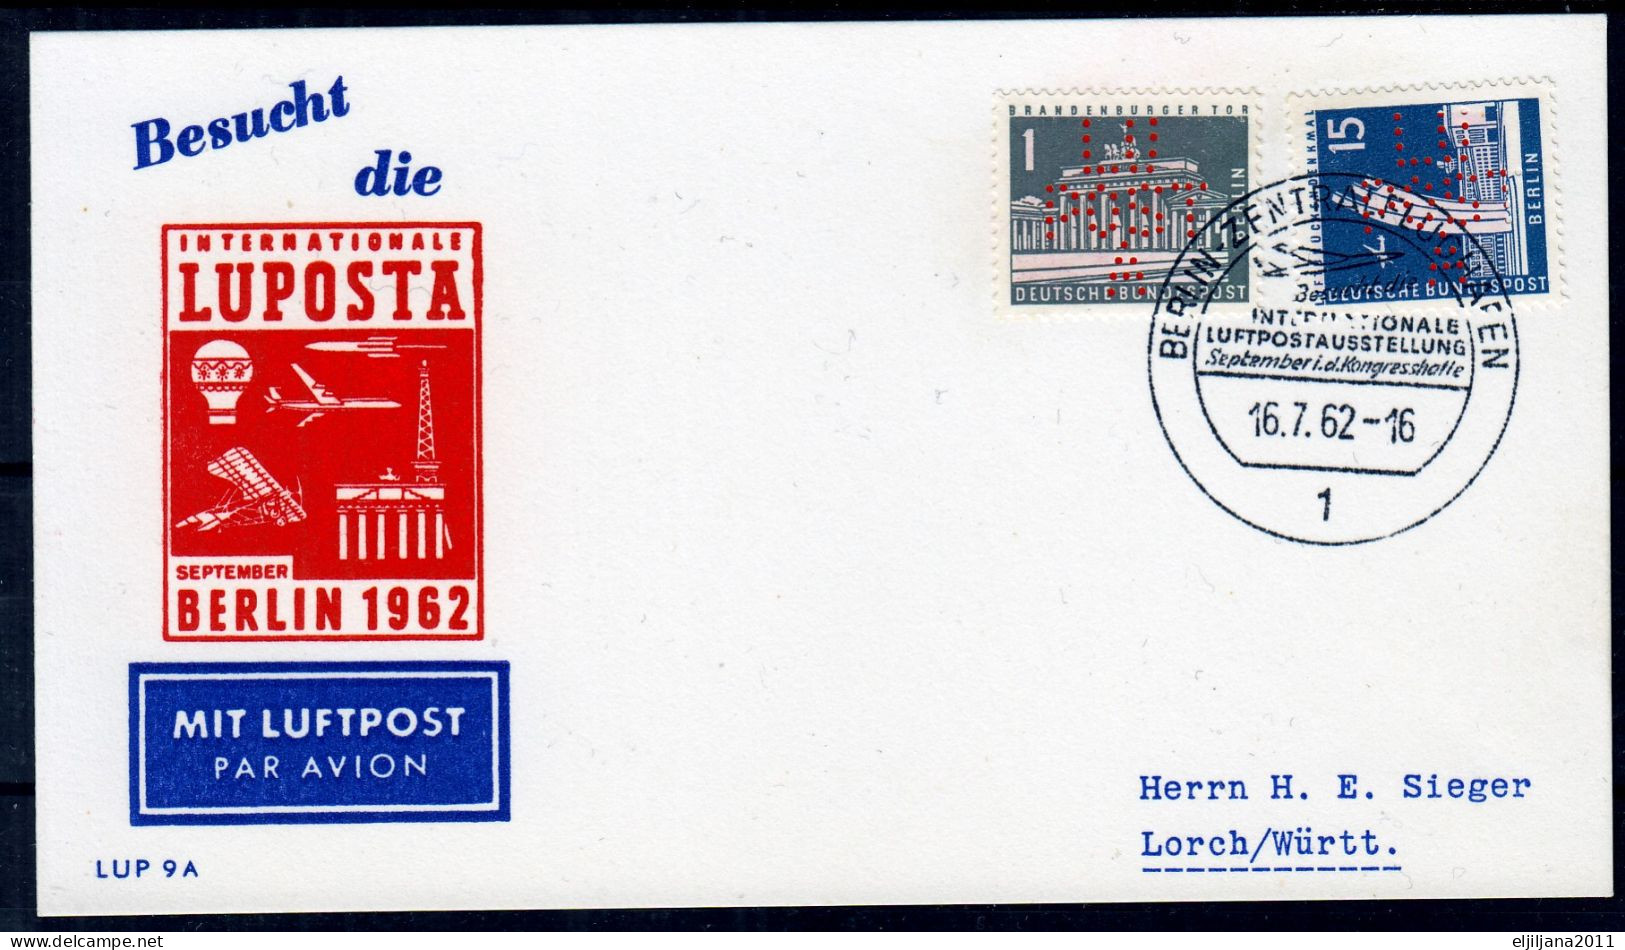 Action !! SALE !! 50 % OFF !! ⁕ Germany BERLIN 1962 ⁕ LUPOSTA Exhibition Airmail Mi.140, 145, 147 ⁕ 2v Postcard - Luftpost